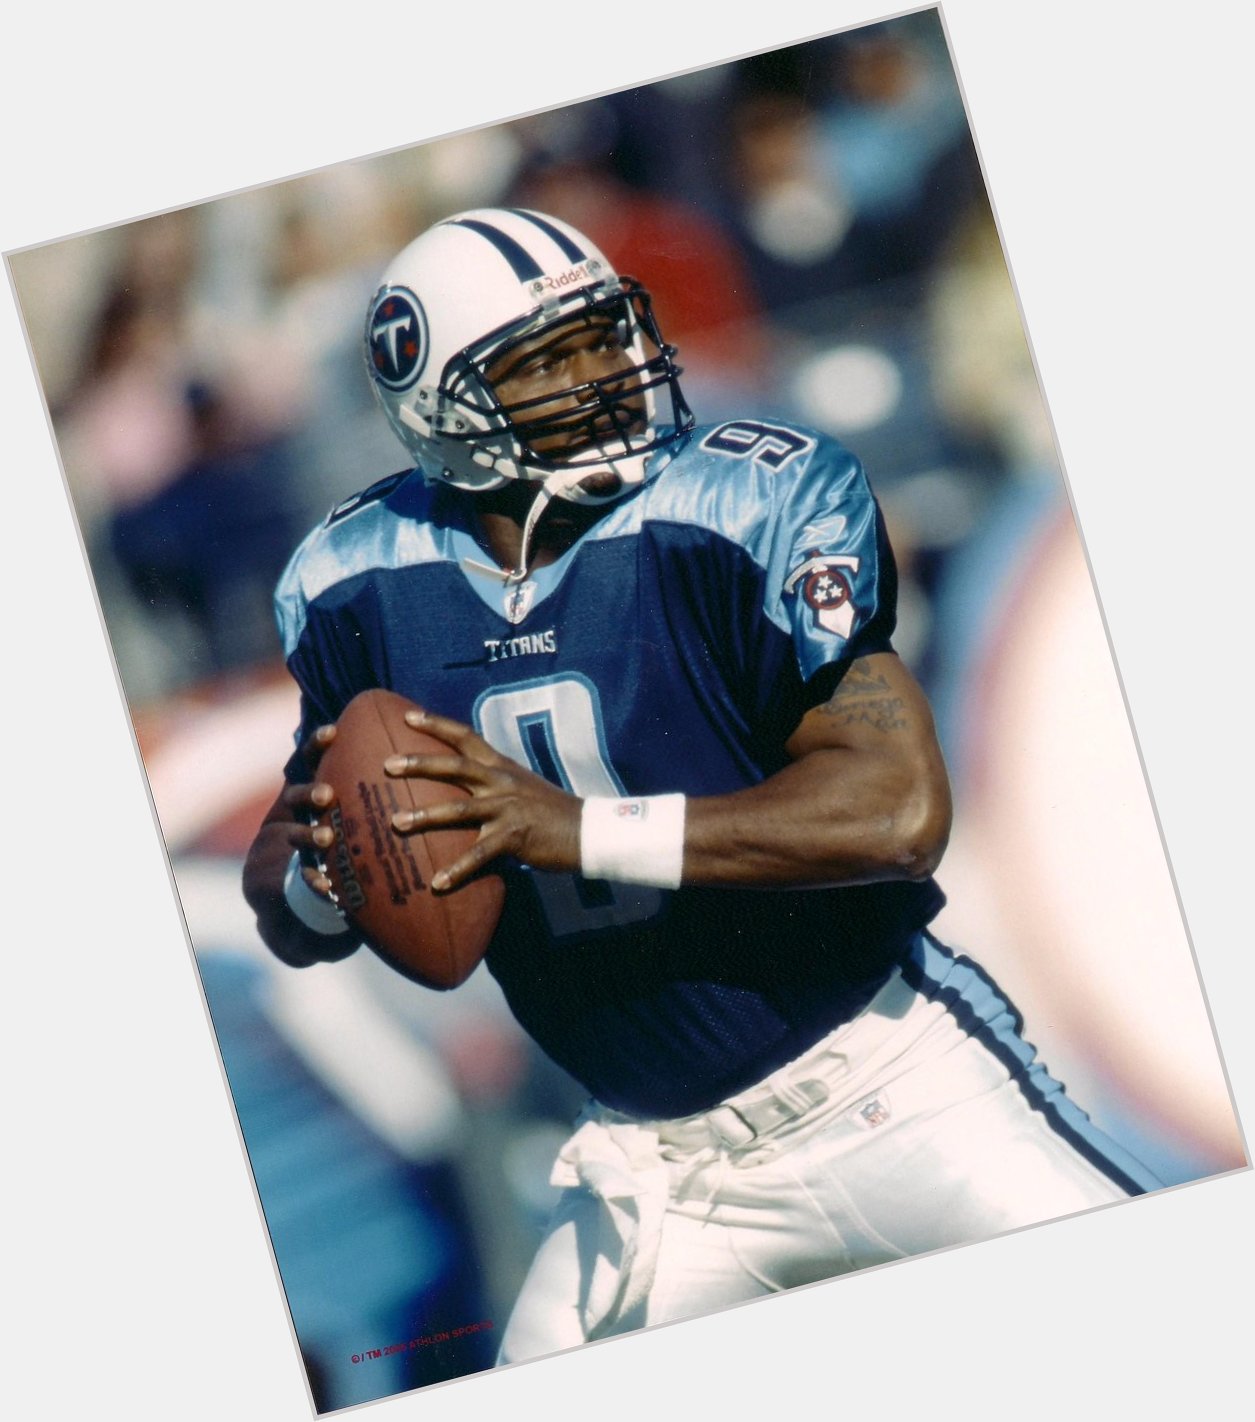 Happy Birthday to Steve McNair, who would have turned 42 today! 